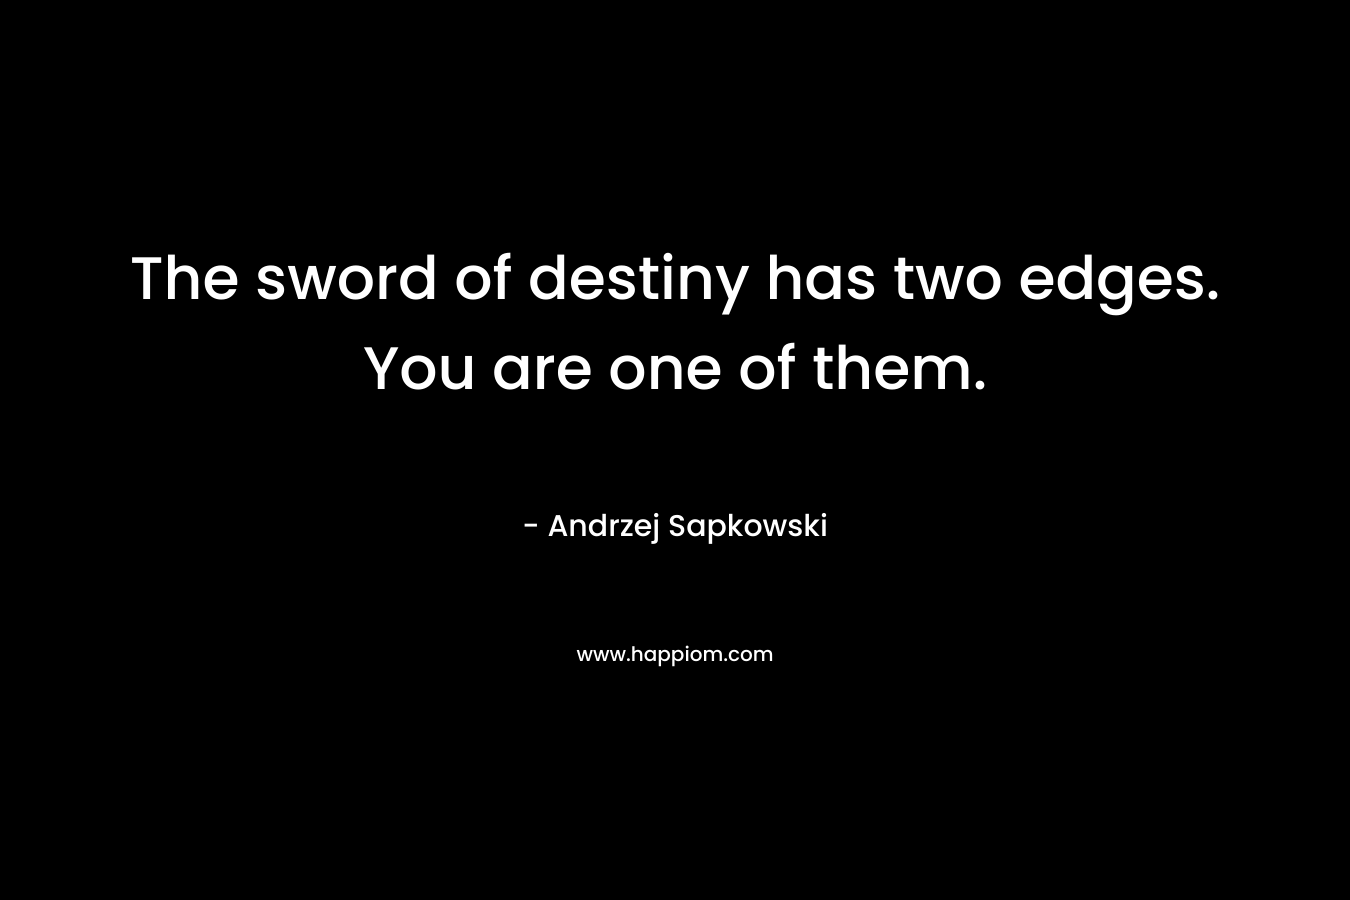 The sword of destiny has two edges. You are one of them.